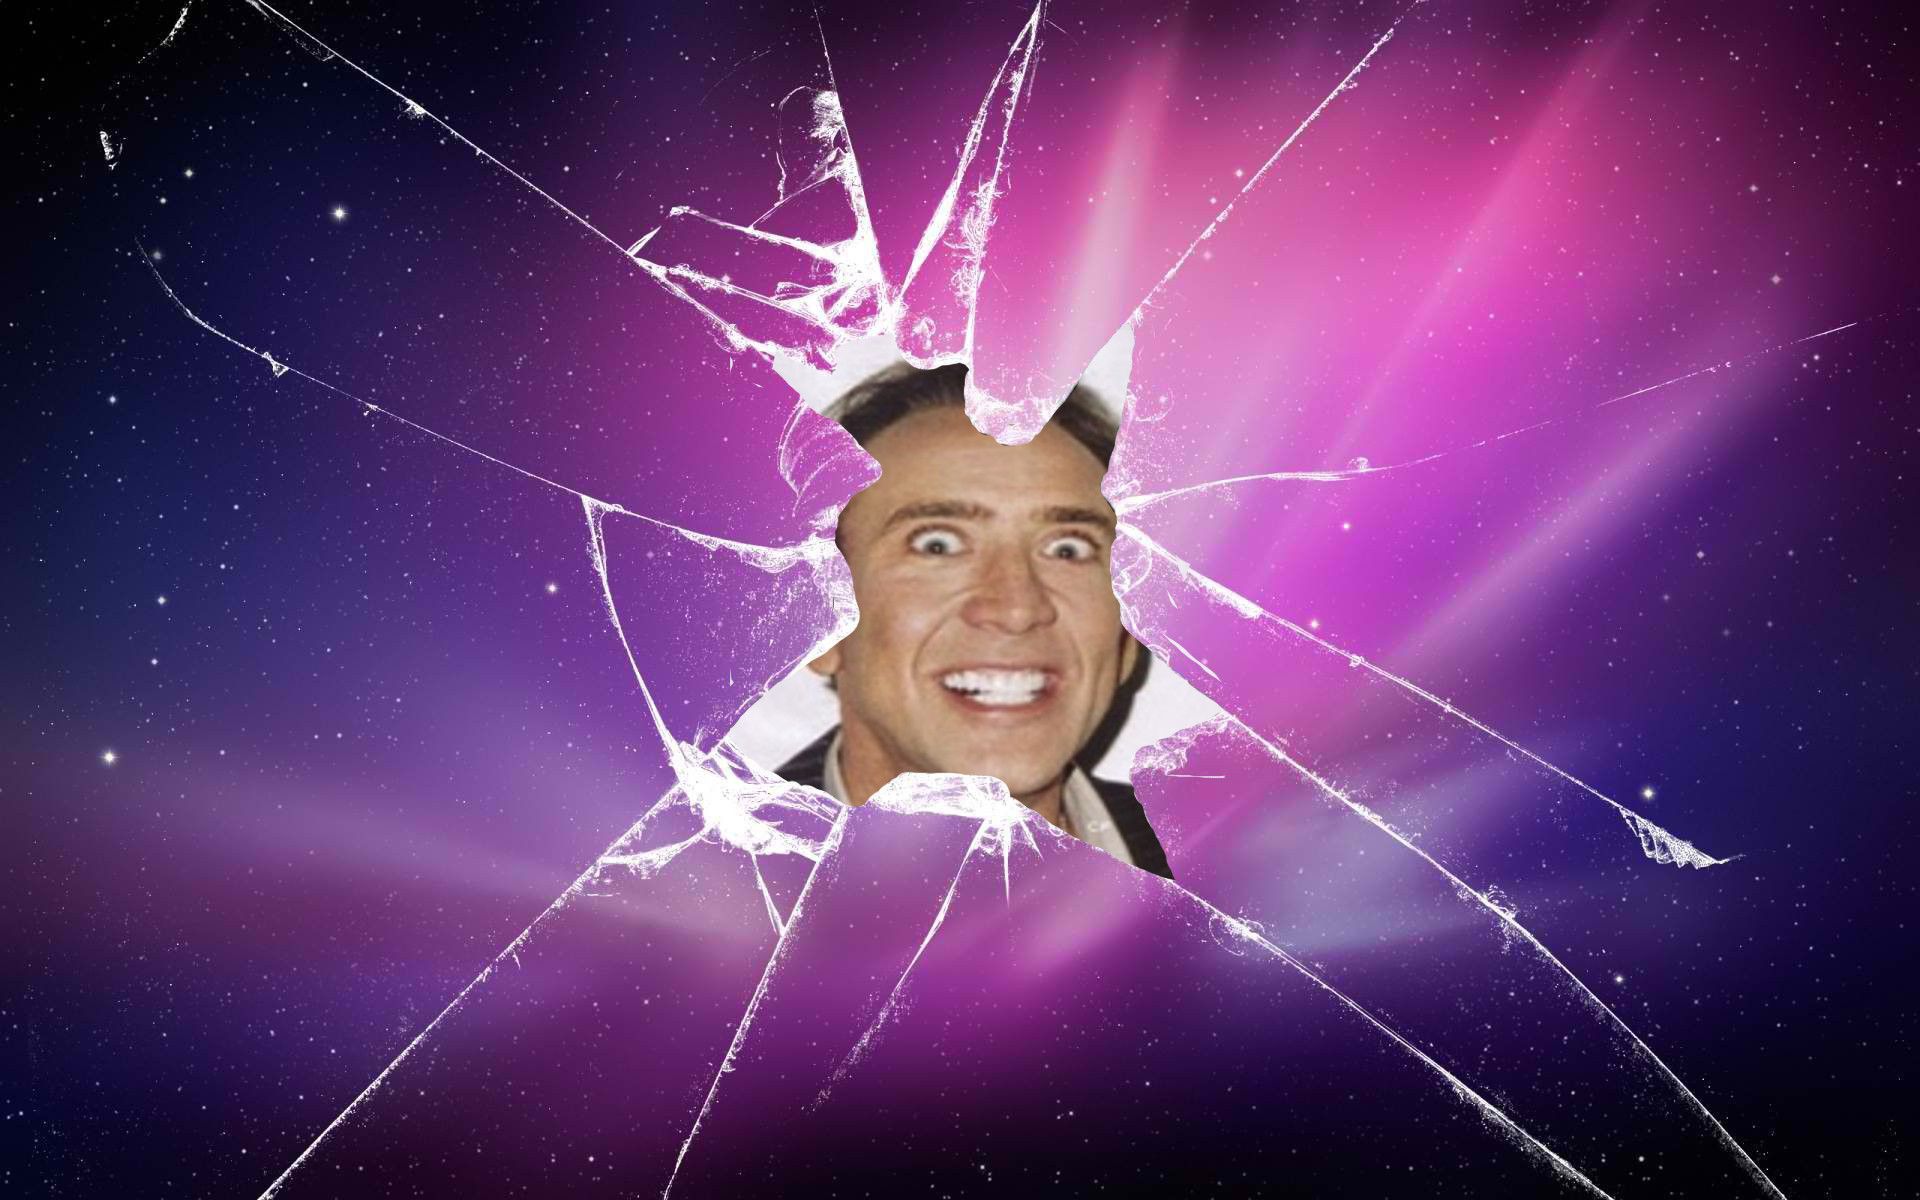 Nicolas Cage Background Wallpaper Collections At Graciaviva Cat